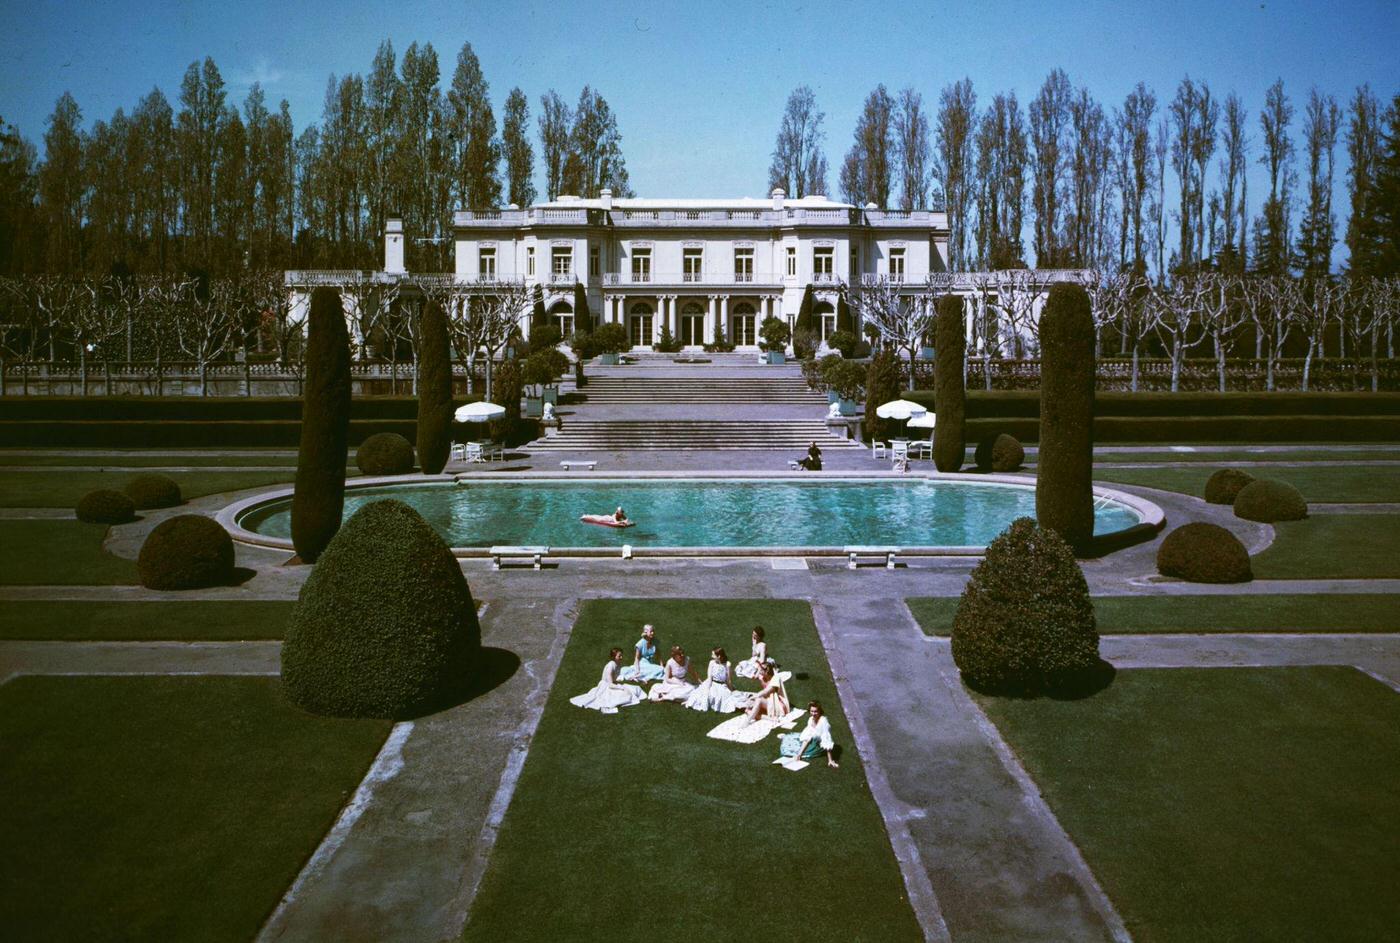 A group of young women enjoying the sunshine in the grounds of the former George Newhall estate in San Francisco, 1960